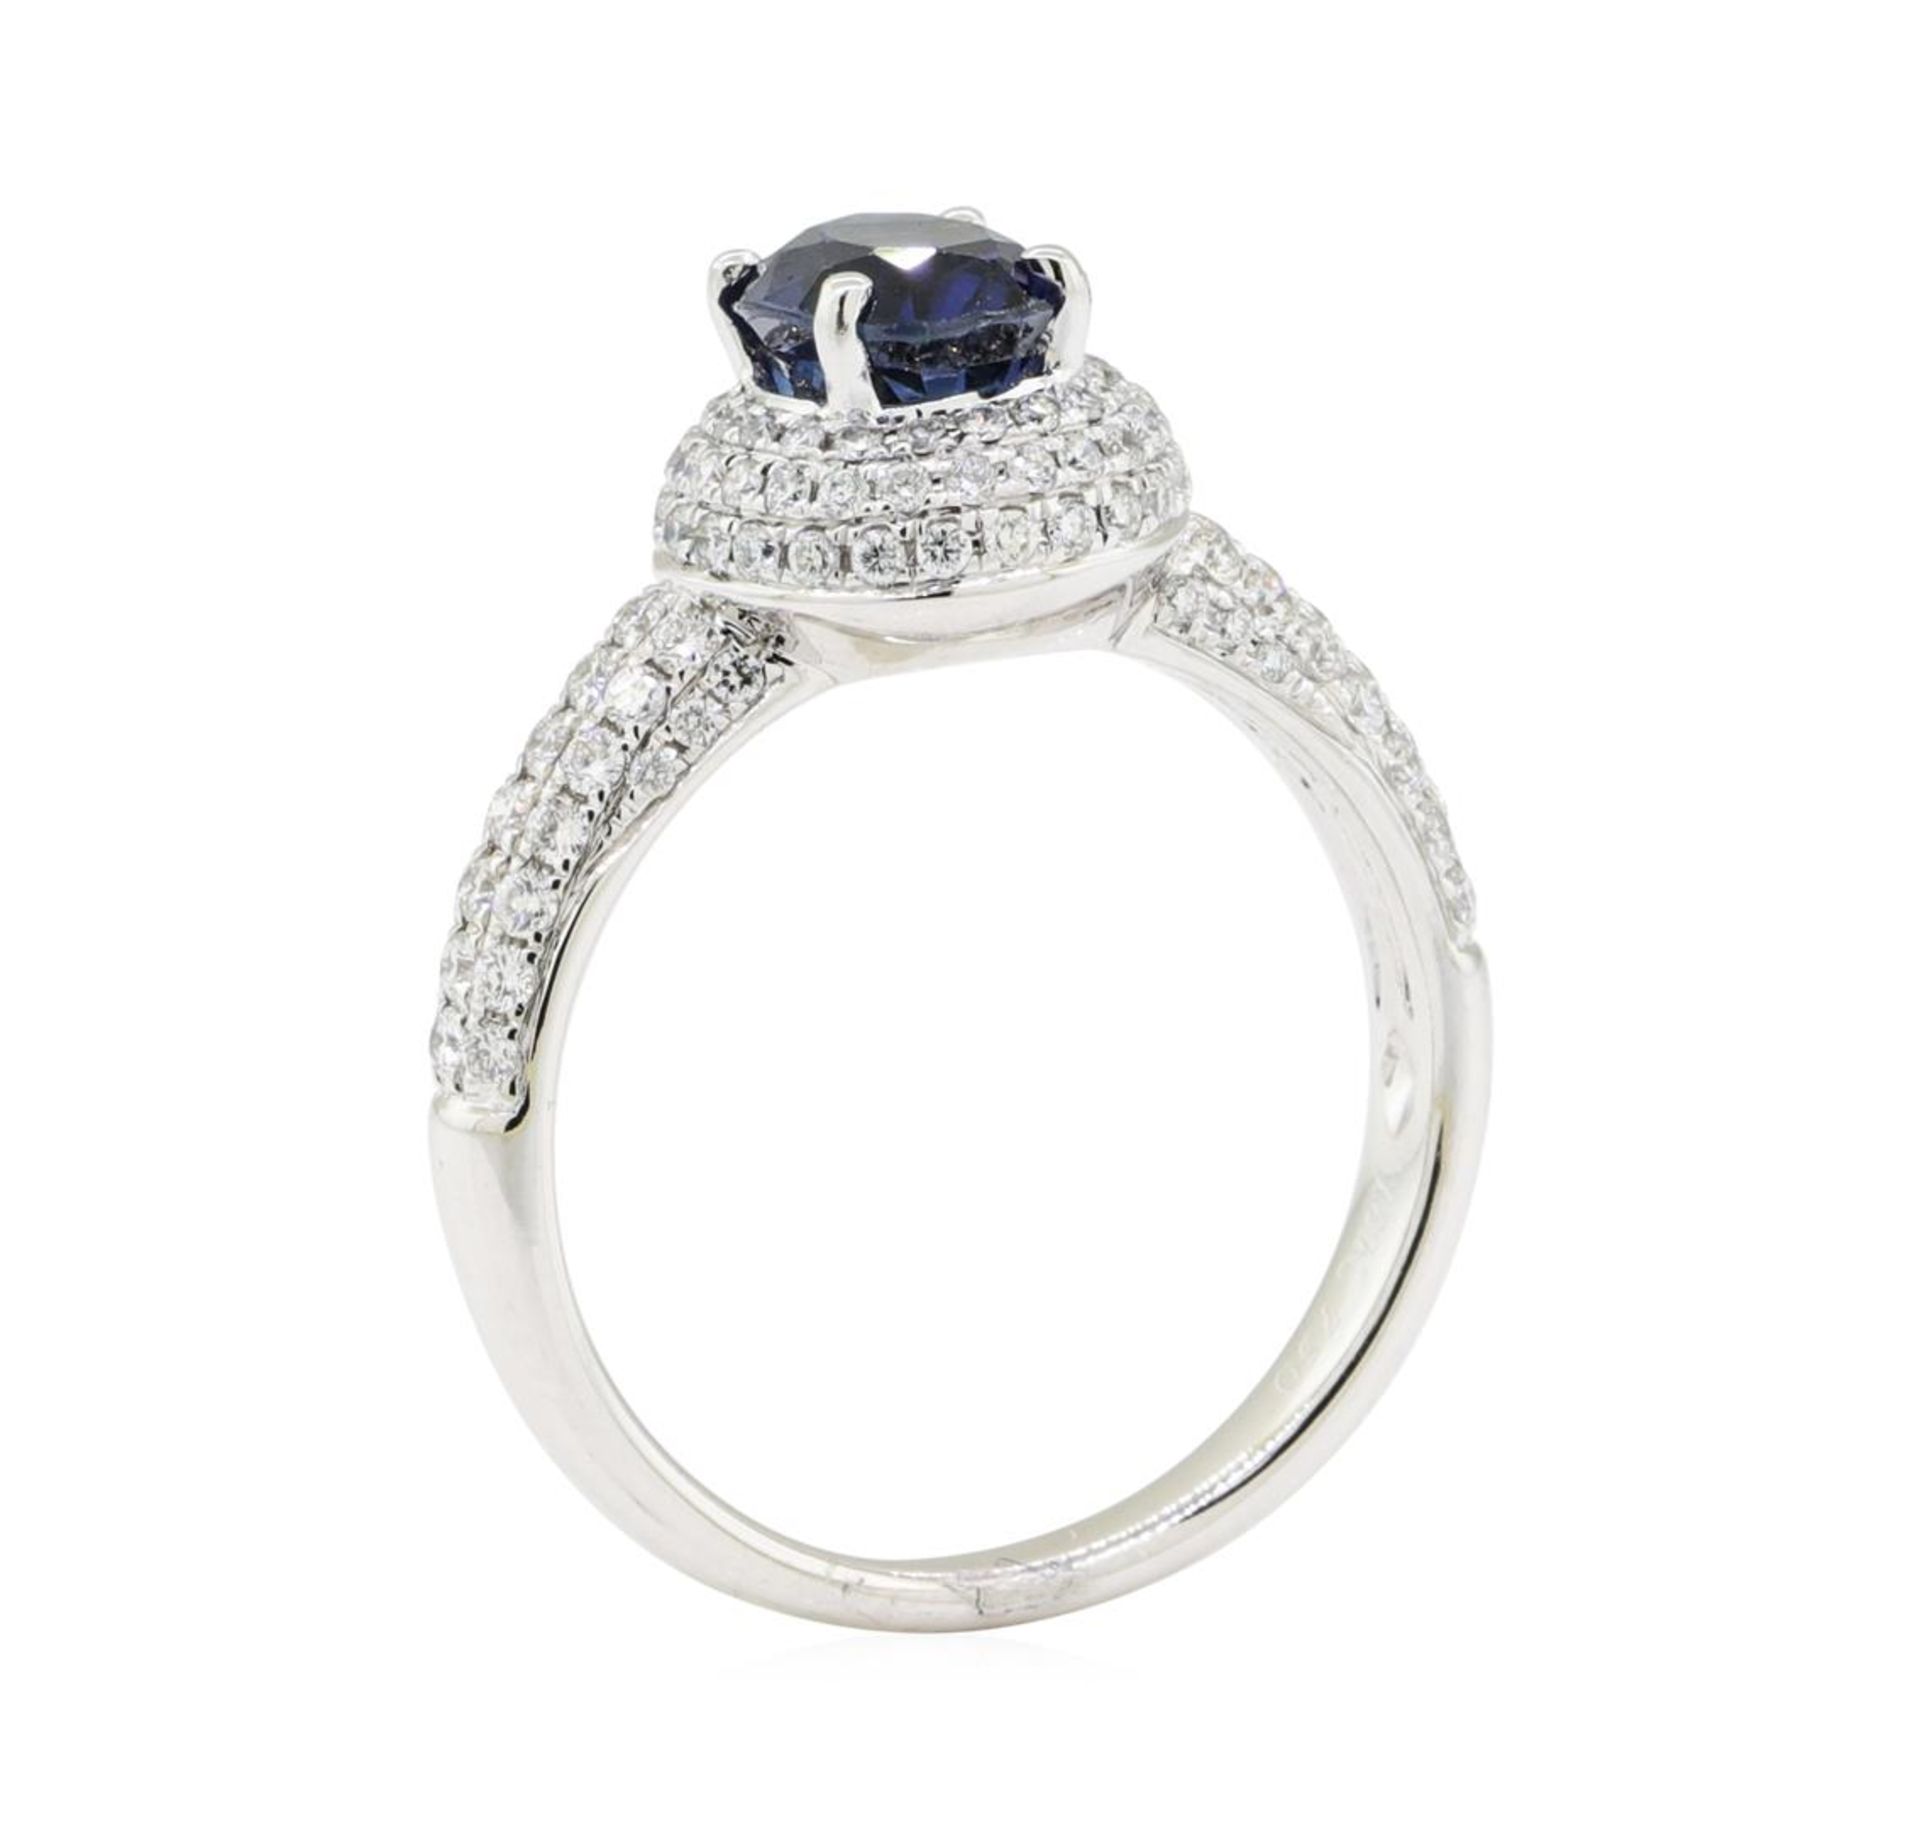 1.94 ctw Sapphire and Diamond Ring - 18KT White Gold - Image 4 of 5